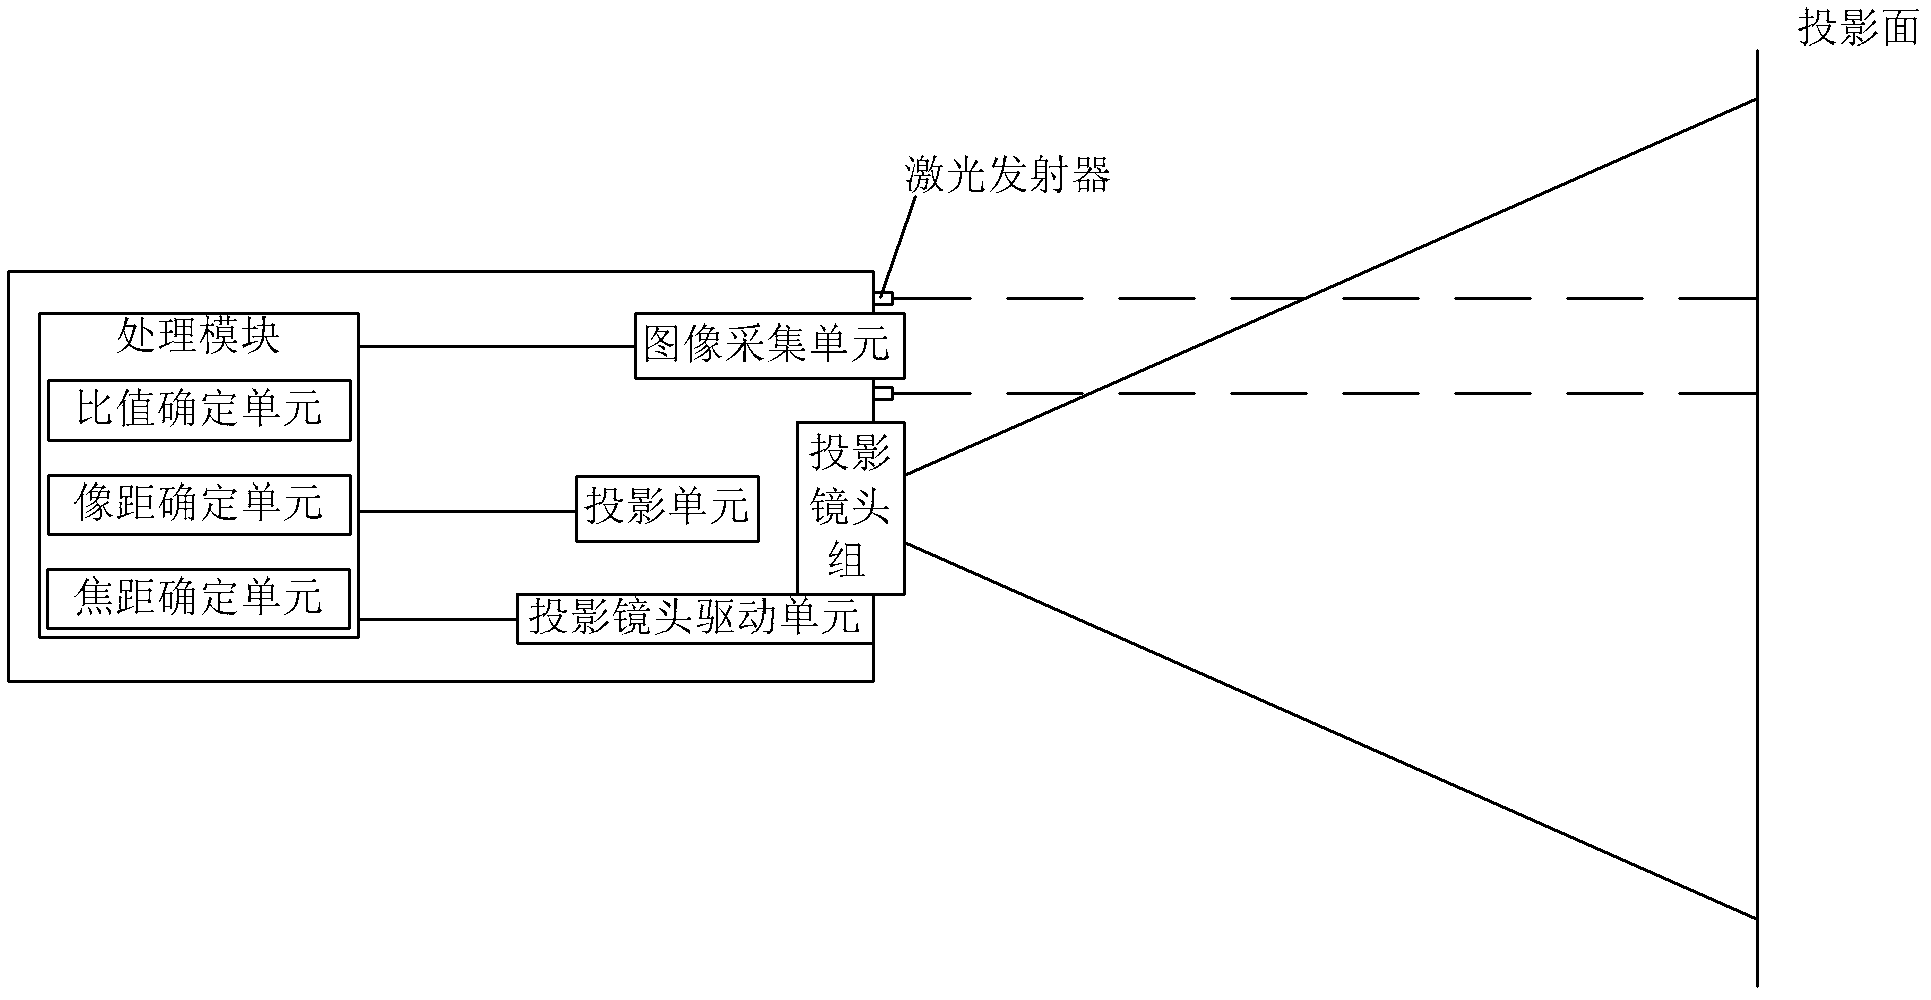 Projection device and automatic focusing method